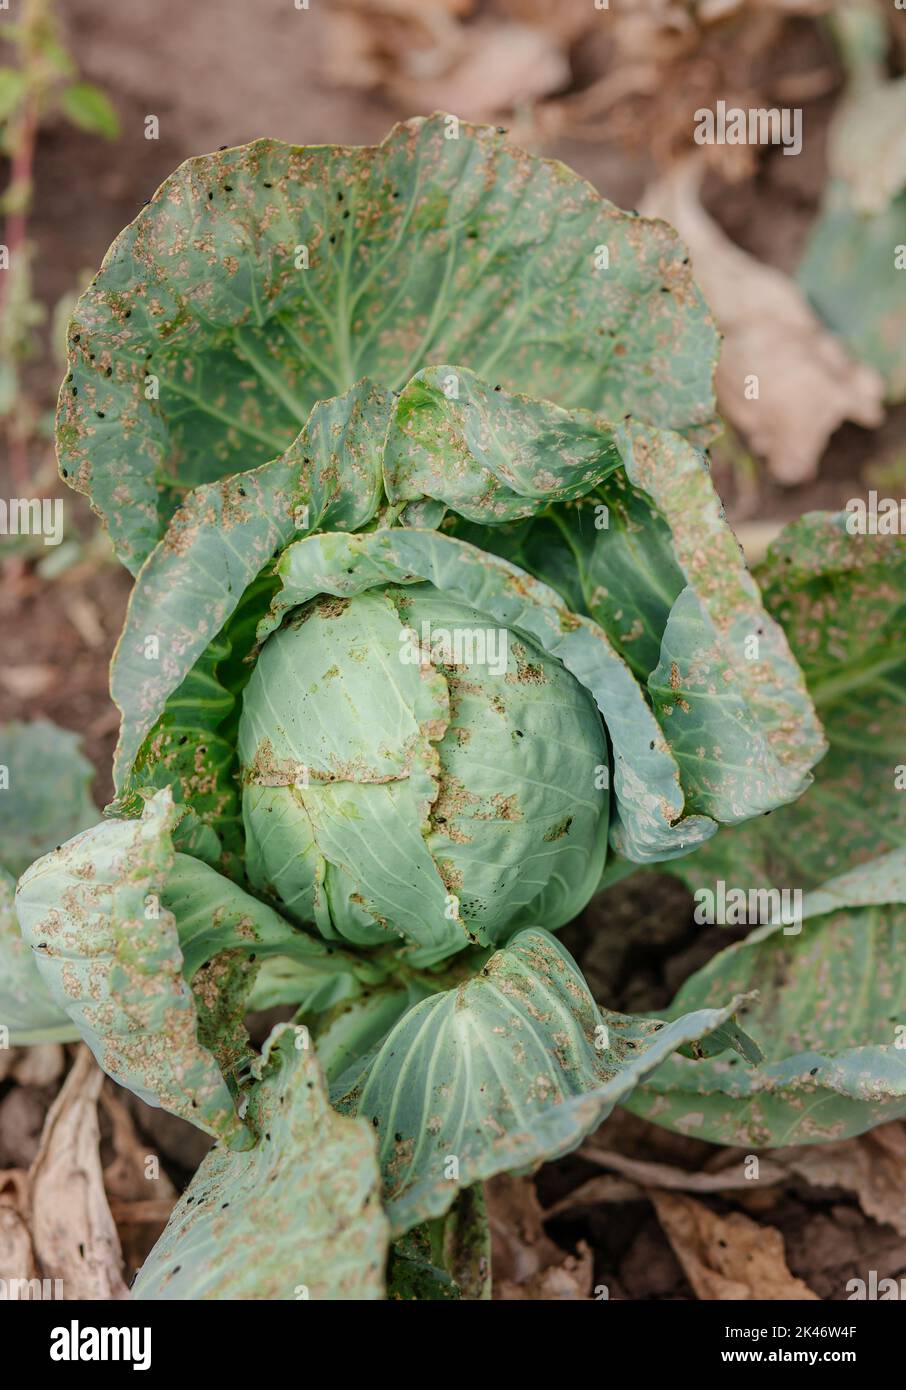 Cabbage in the agriculture field, eaten by slugs. Sick cabbage leaves affected by pests and pathogenic fungi. Stock Photo